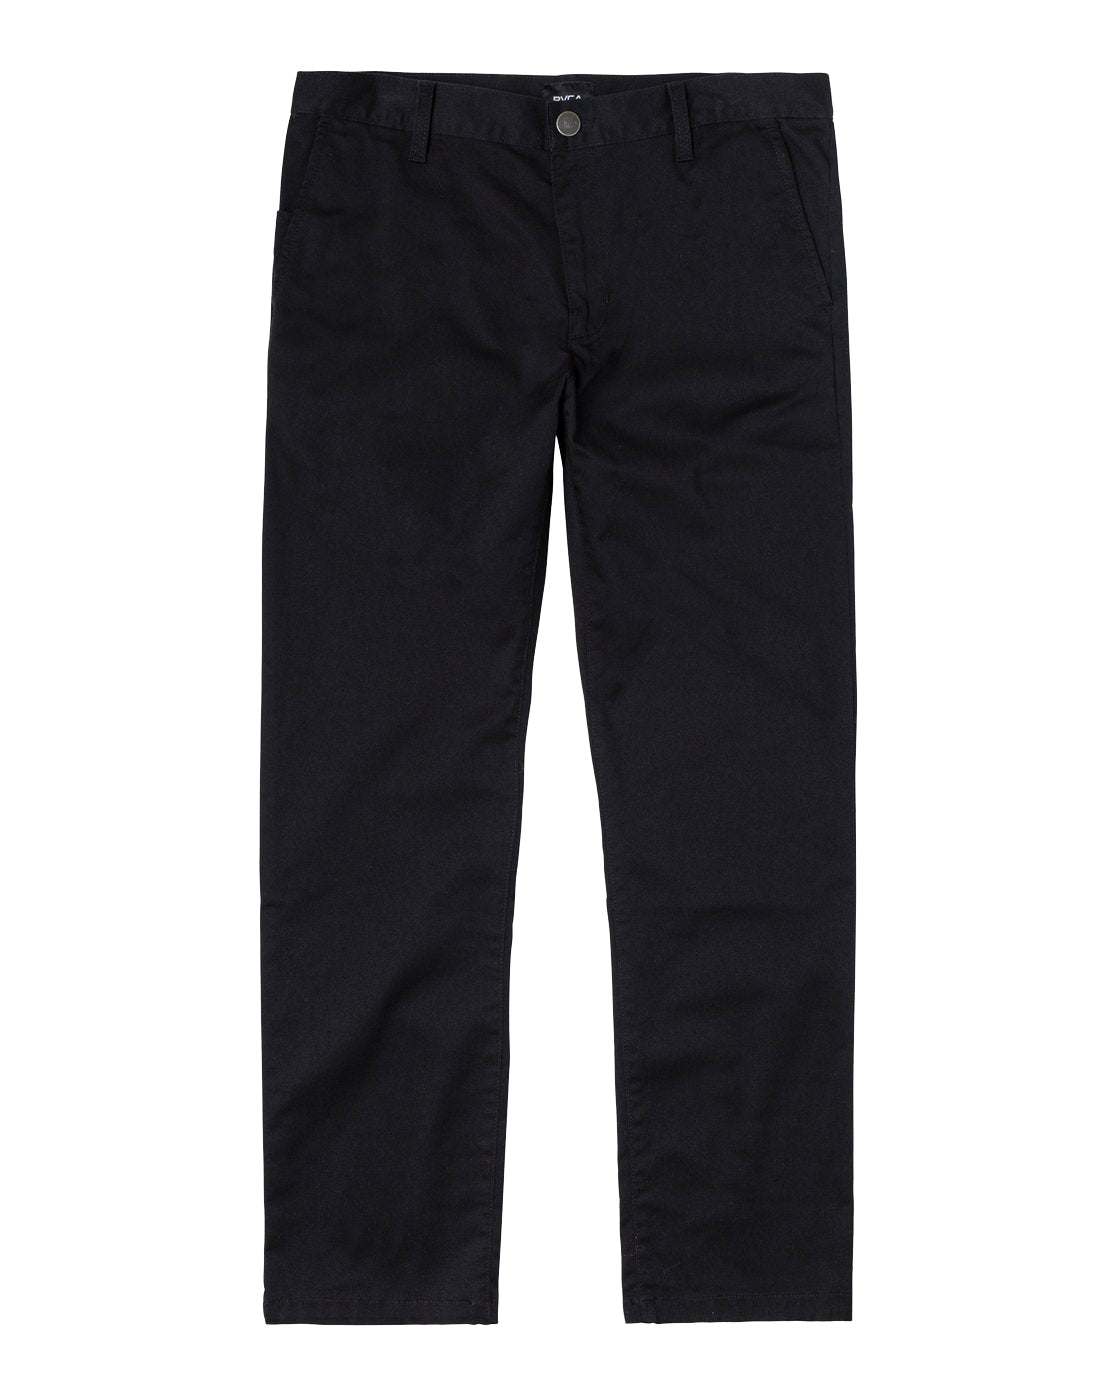 RVCA Weekend Stretch Straight Fit Pant BLK 38